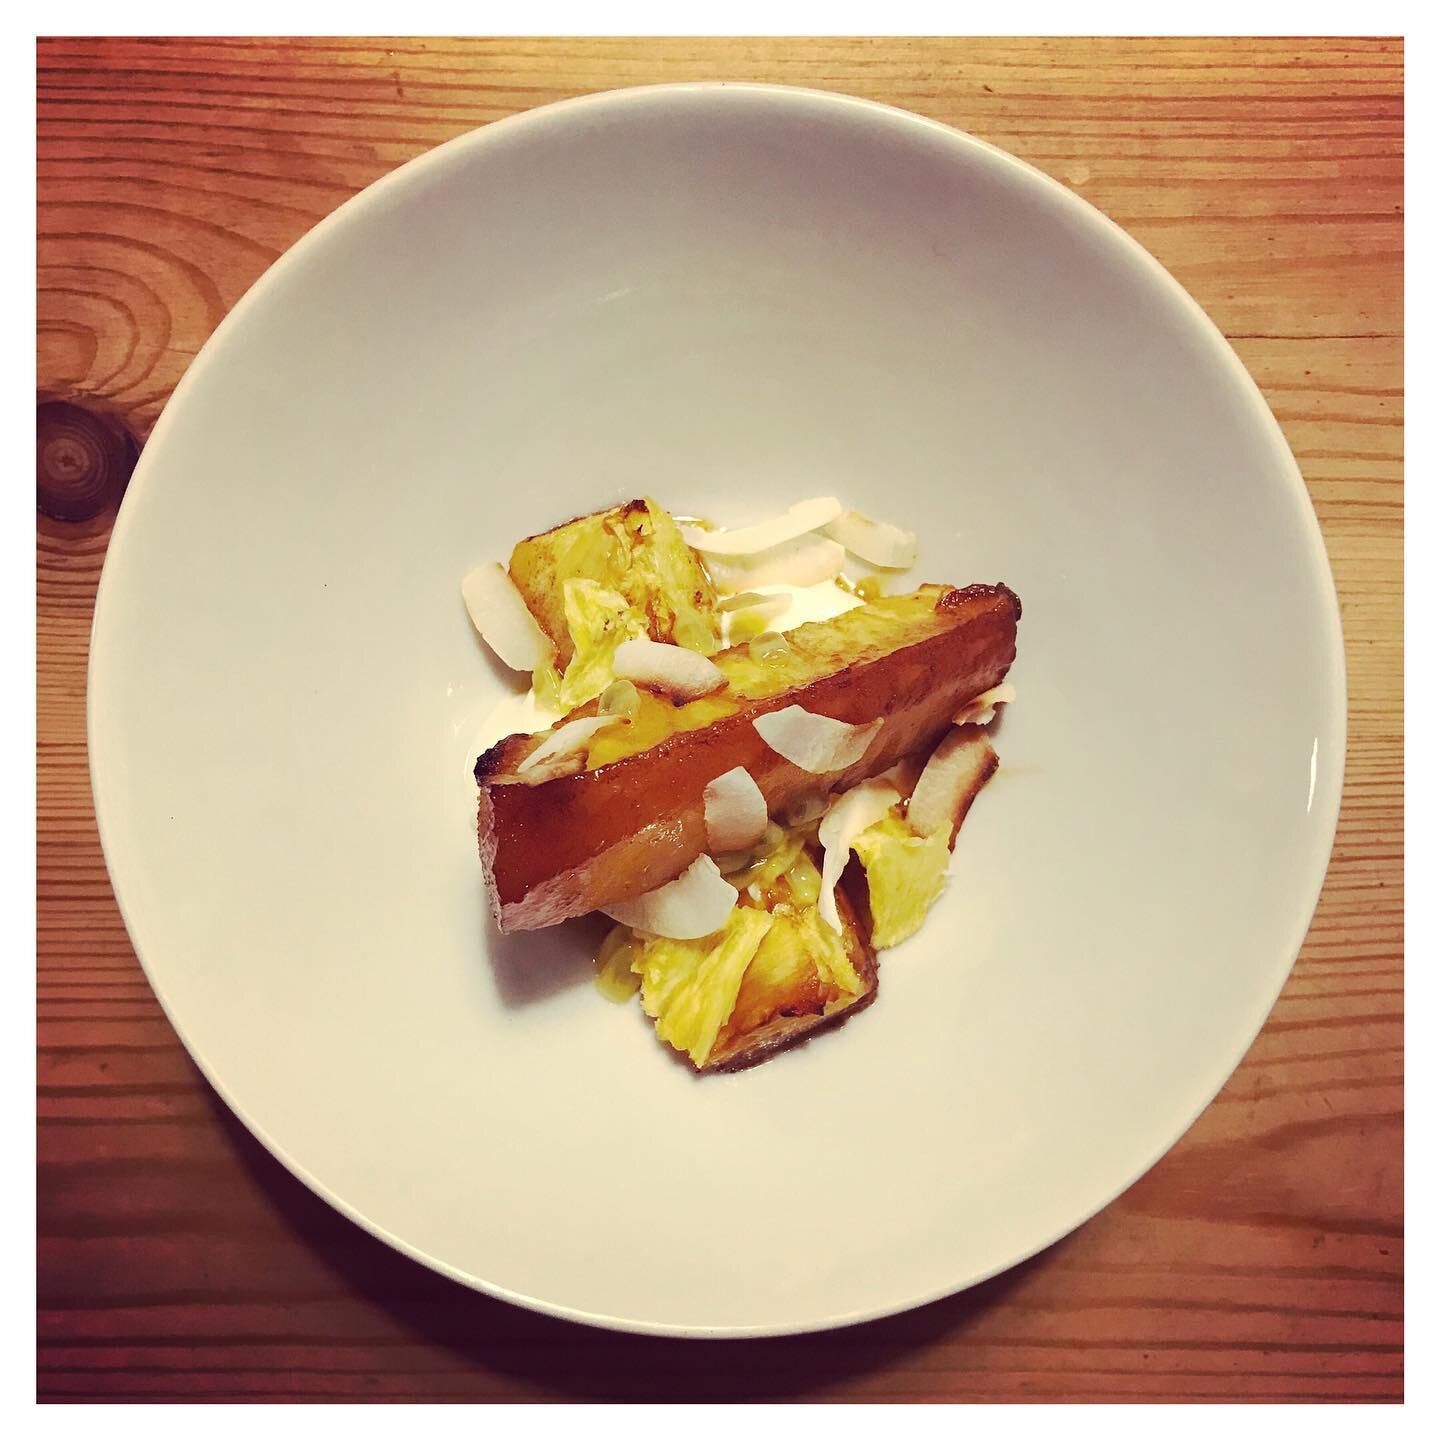 Rum roasted pineapple with coconut yoghurt, salted caramel, and pineapple crisps. Top pud, and available this week as part of our delivered three course dinner!